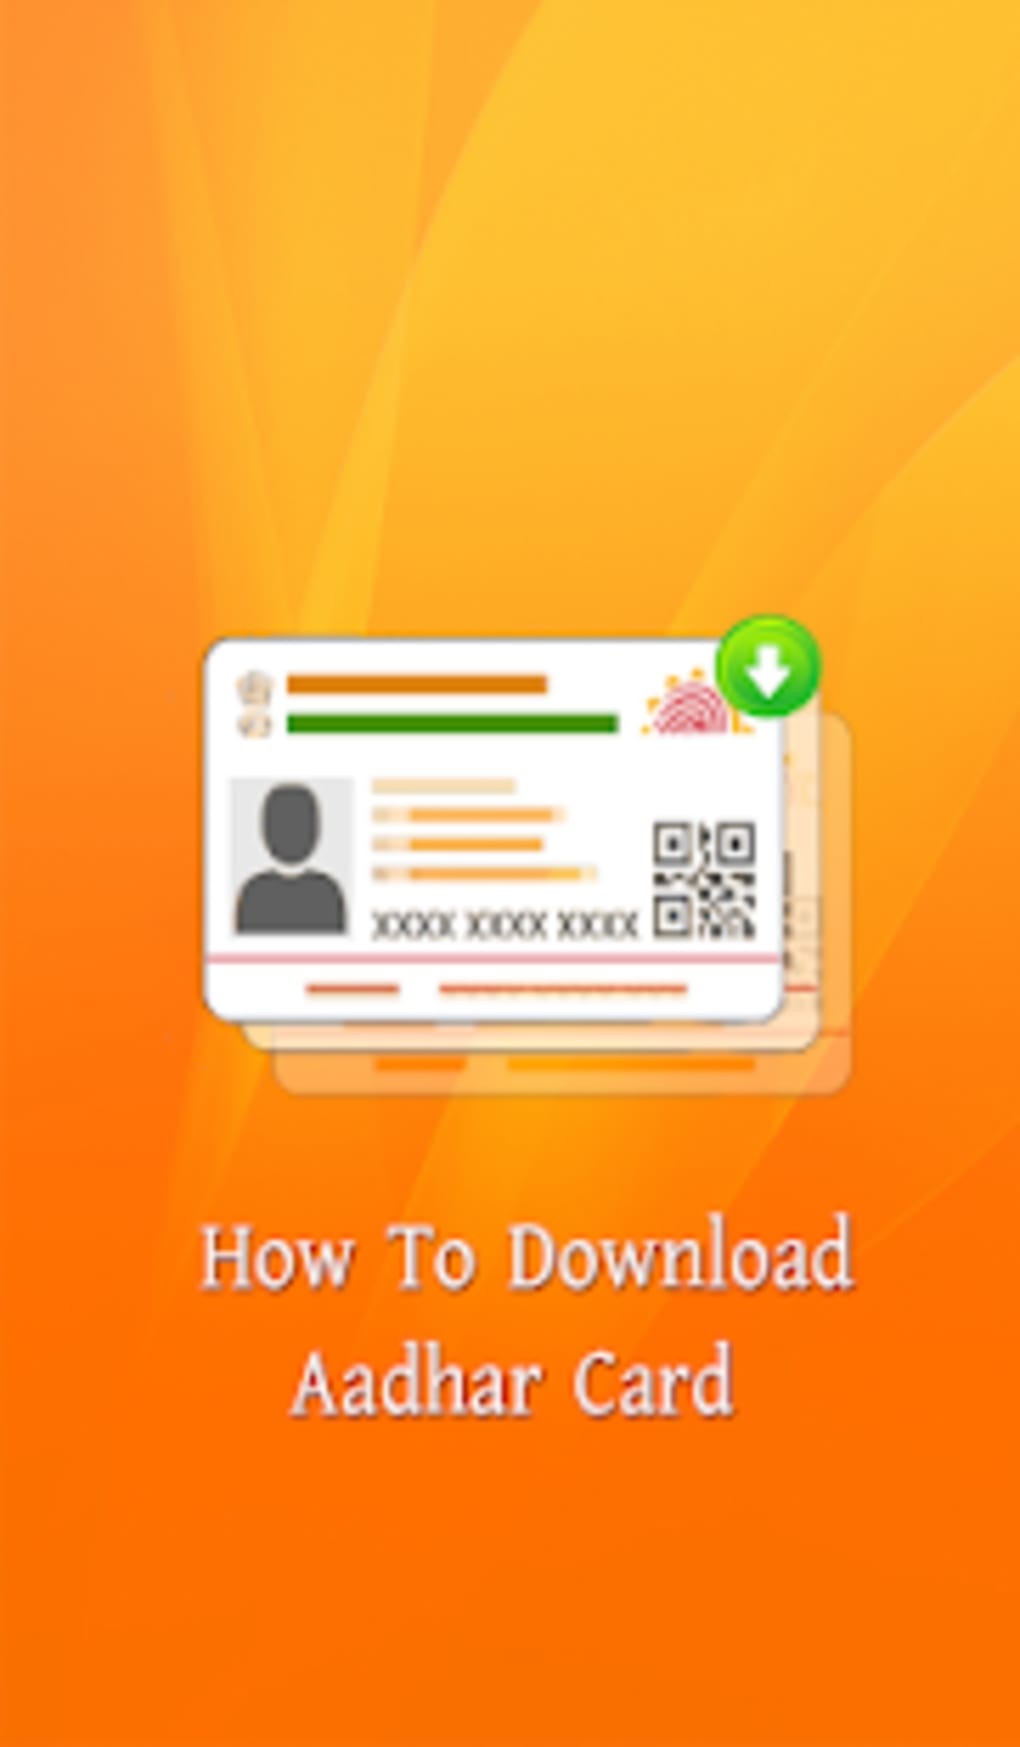 How to Download Aadhar Card Guide voor Android - Download